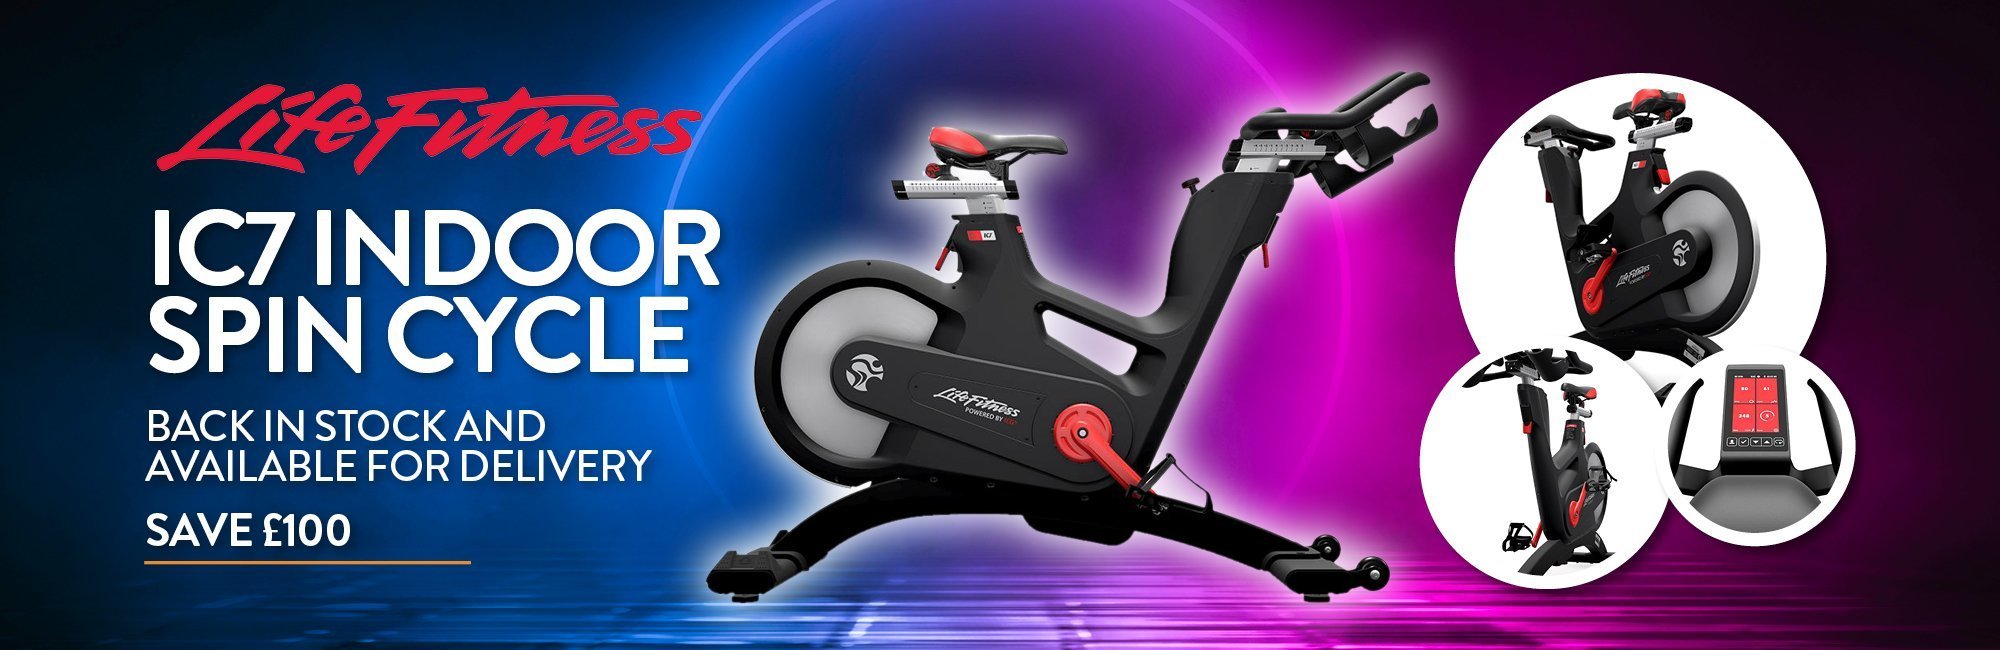 Life Fitness IC7 Indoor Spin Cycle Back in Stock - Save £100!